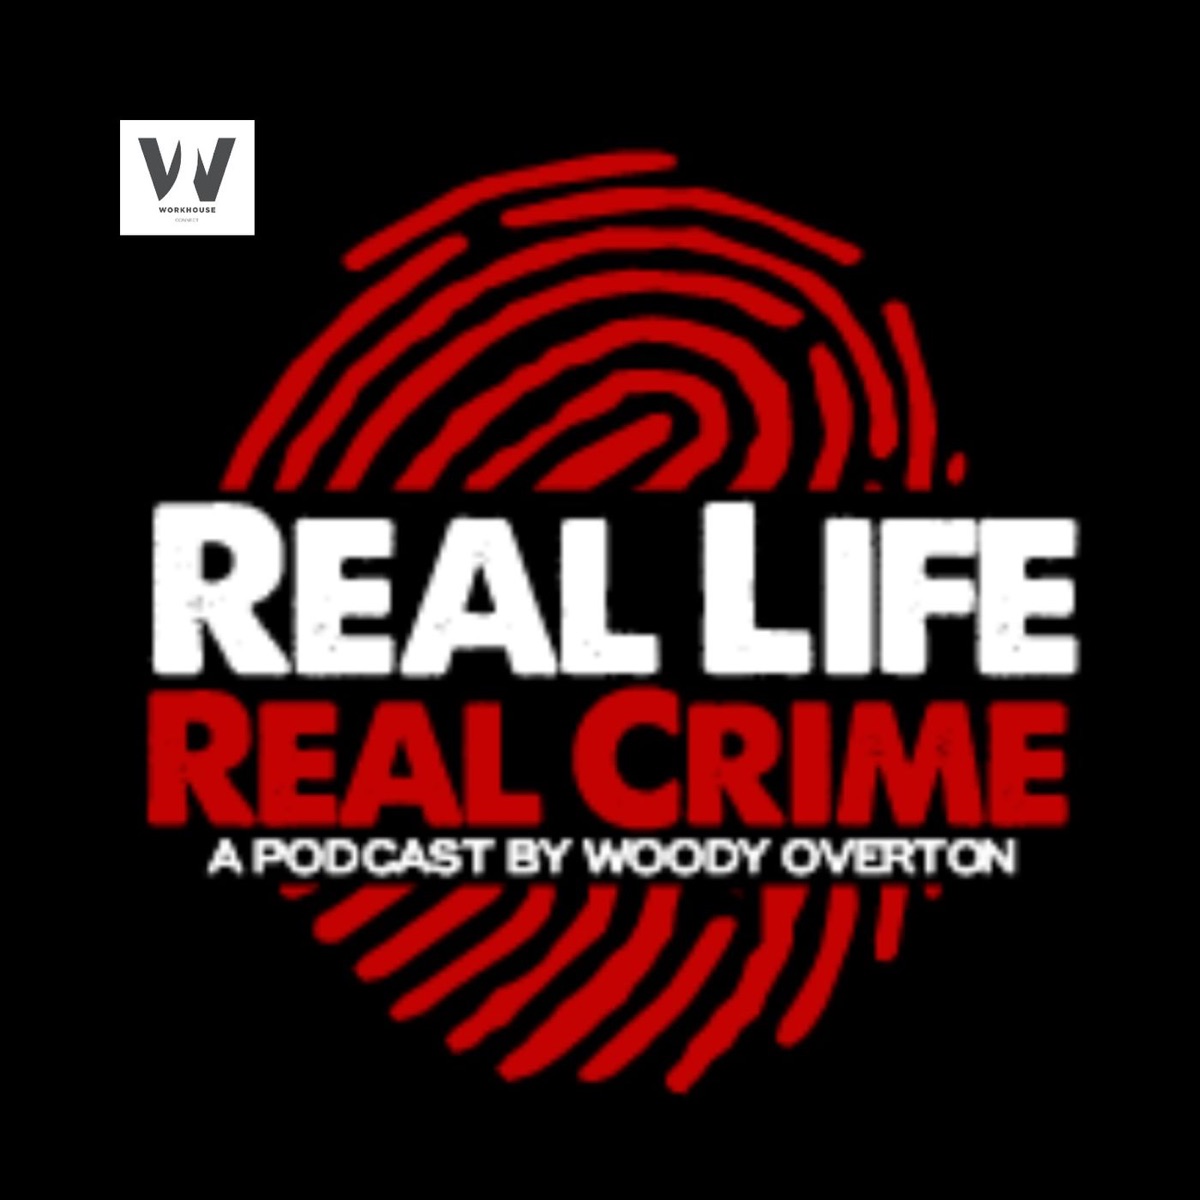 Real Life Real Crime – Podcast